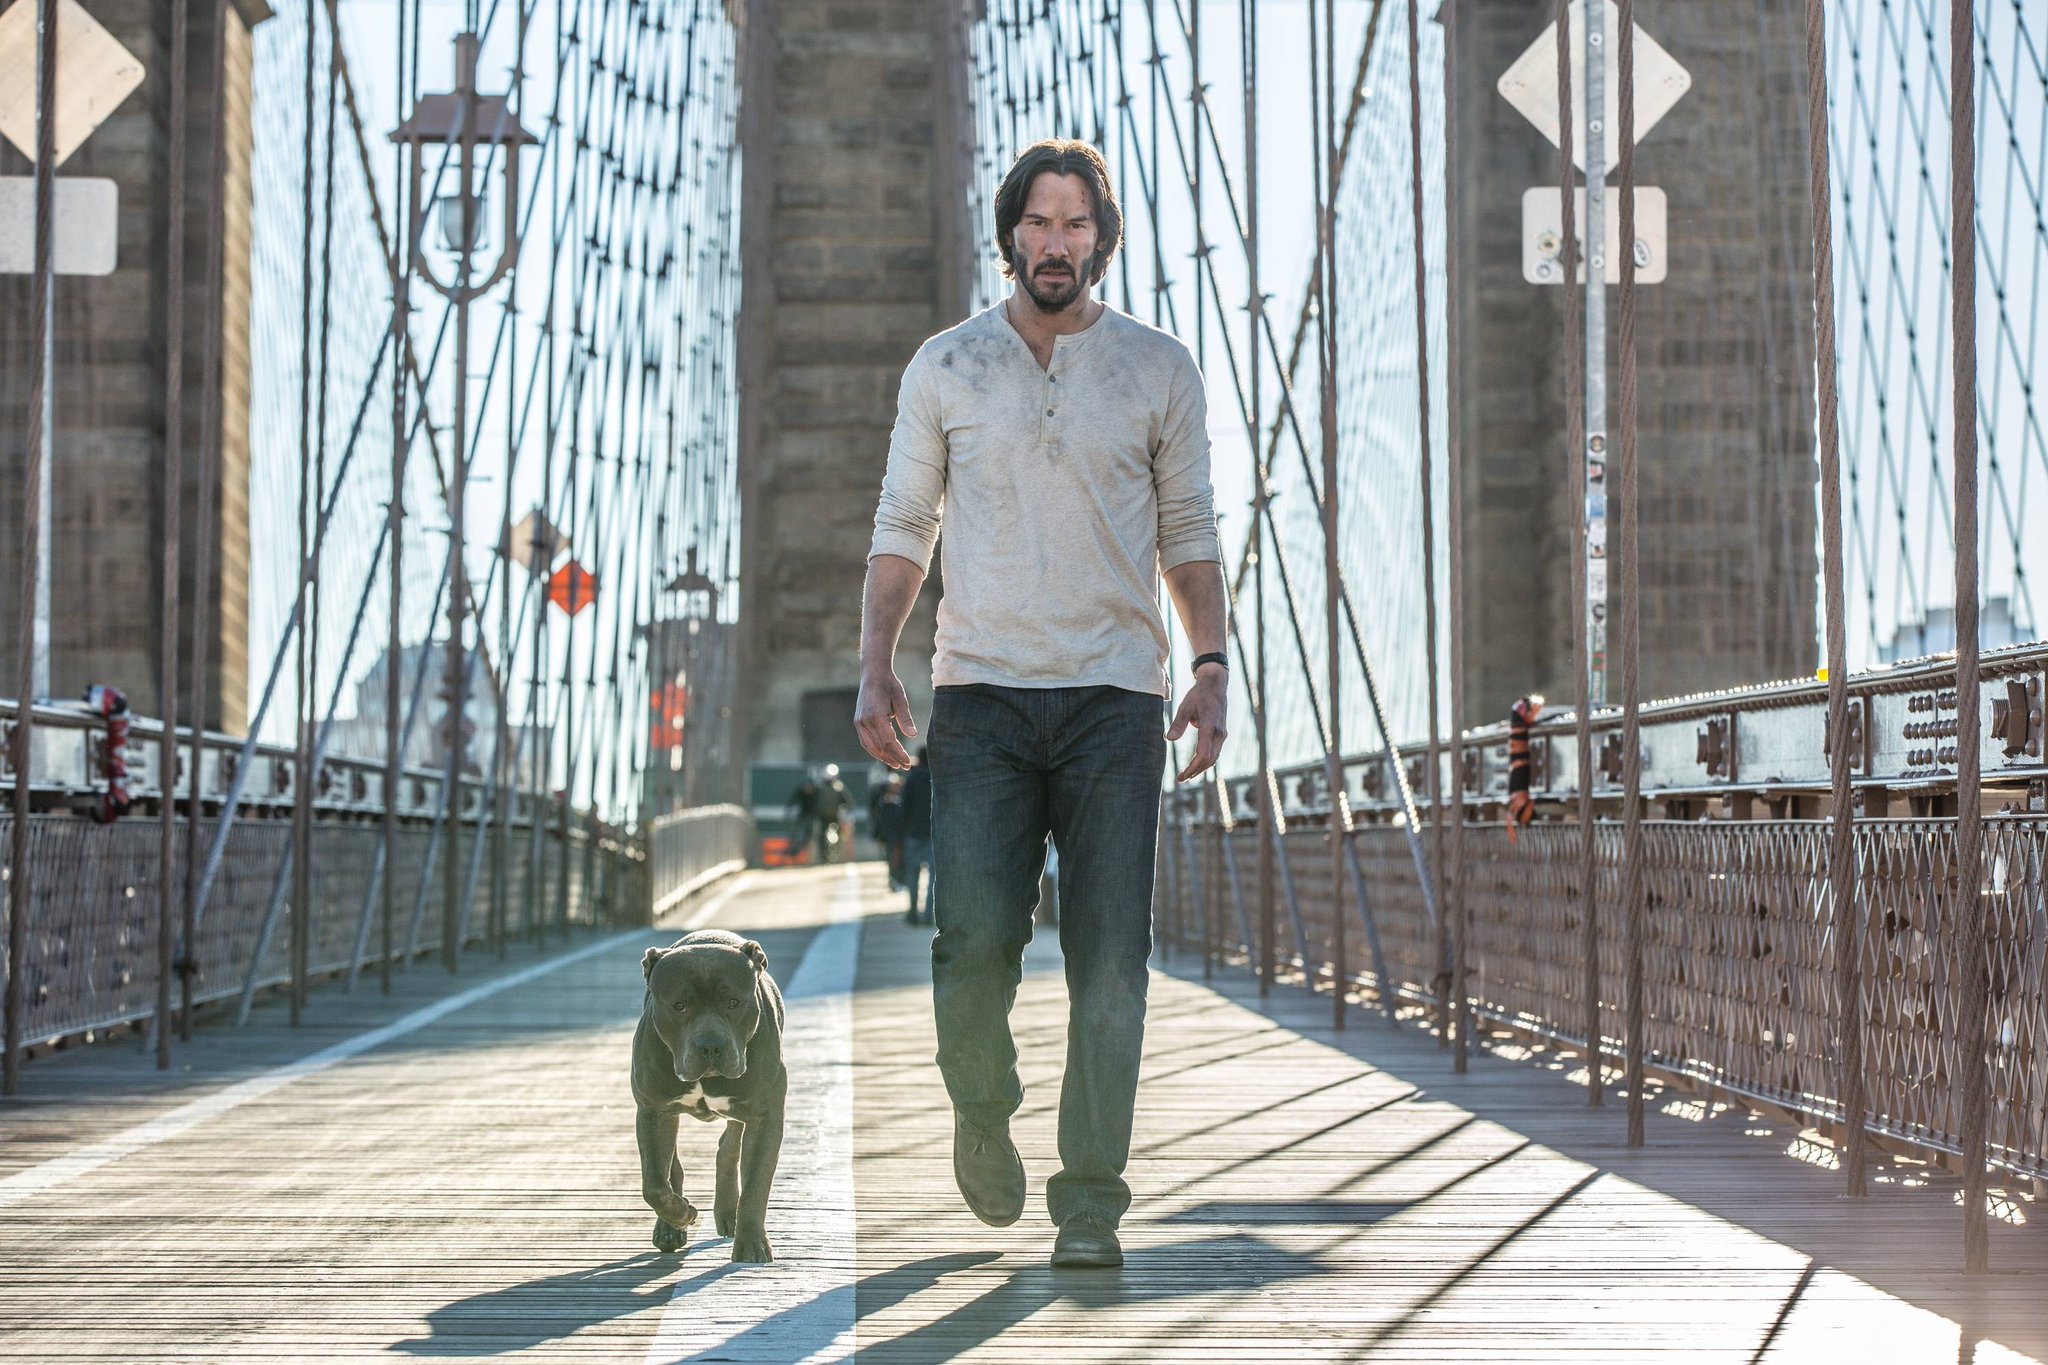 Happy birthday to the one and only Keanu Reeves. What s your favorite moment from John Wick Chapters 1 & 2? 